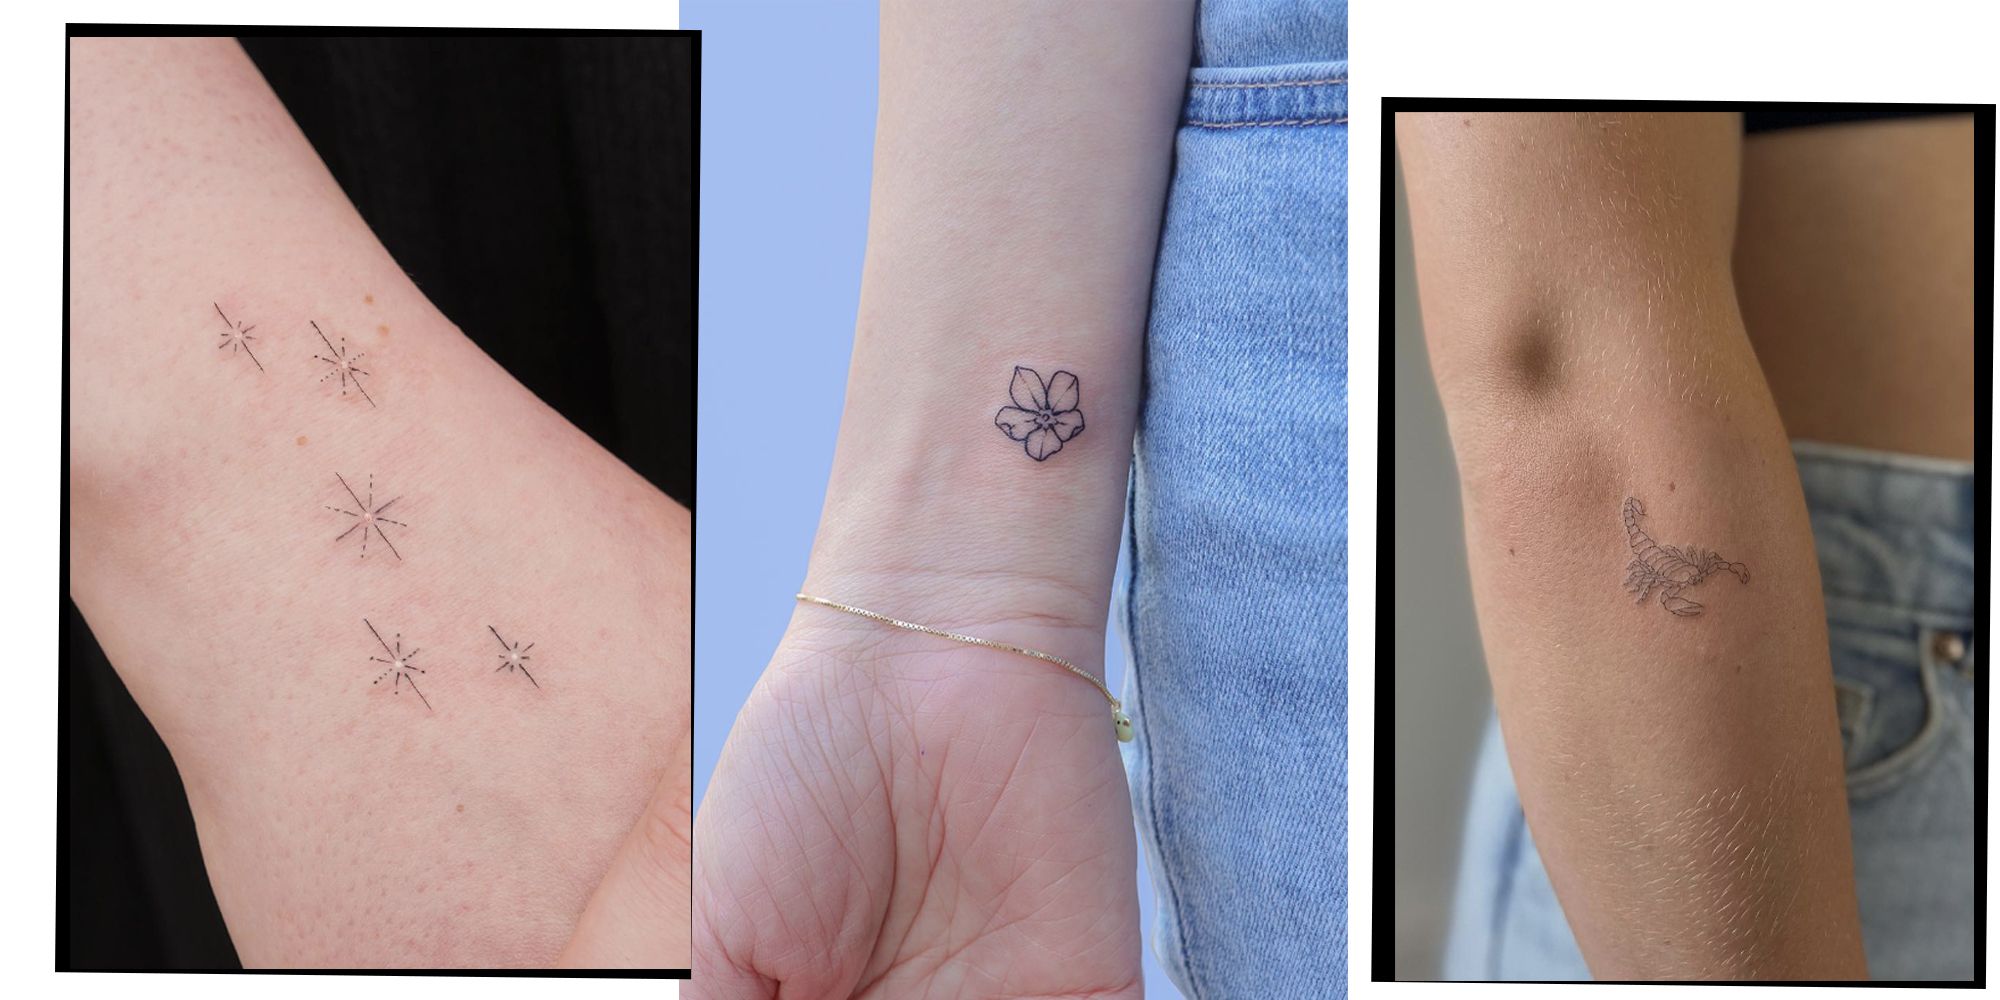 Cute tiny tattoo designs for girls | small but meaningful tattoo arts for  girls - YouTube